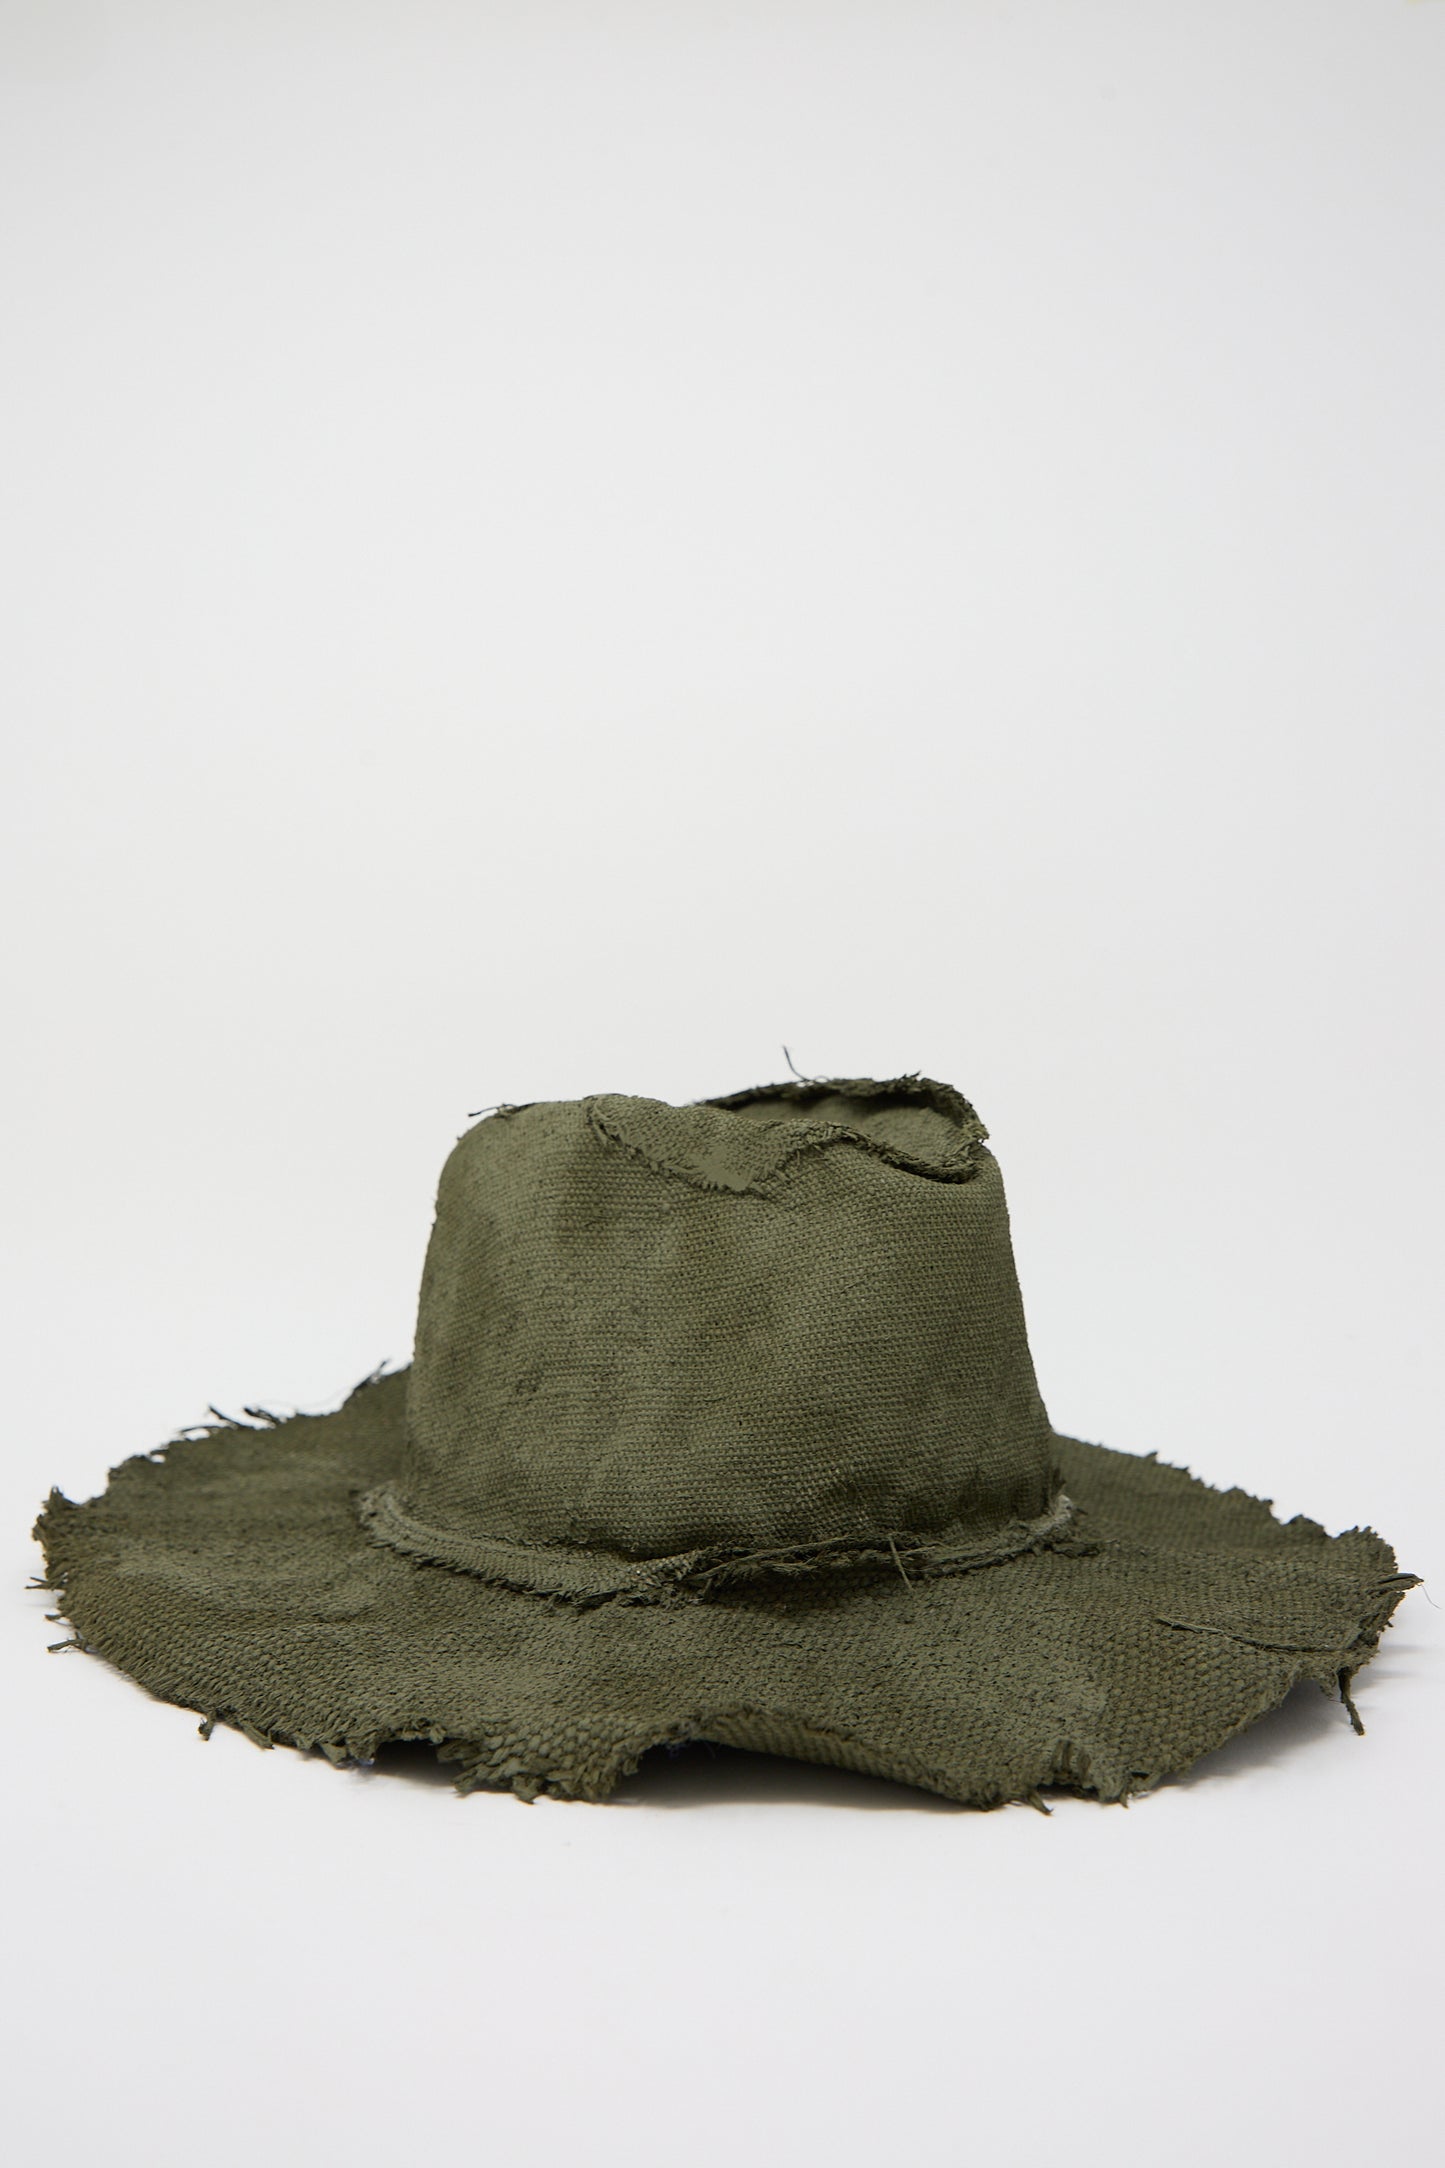 A worn, frayed Reinhard Plank Beghe S Jute Hat in Green with visible stitching and holes, displayed against a plain white background.